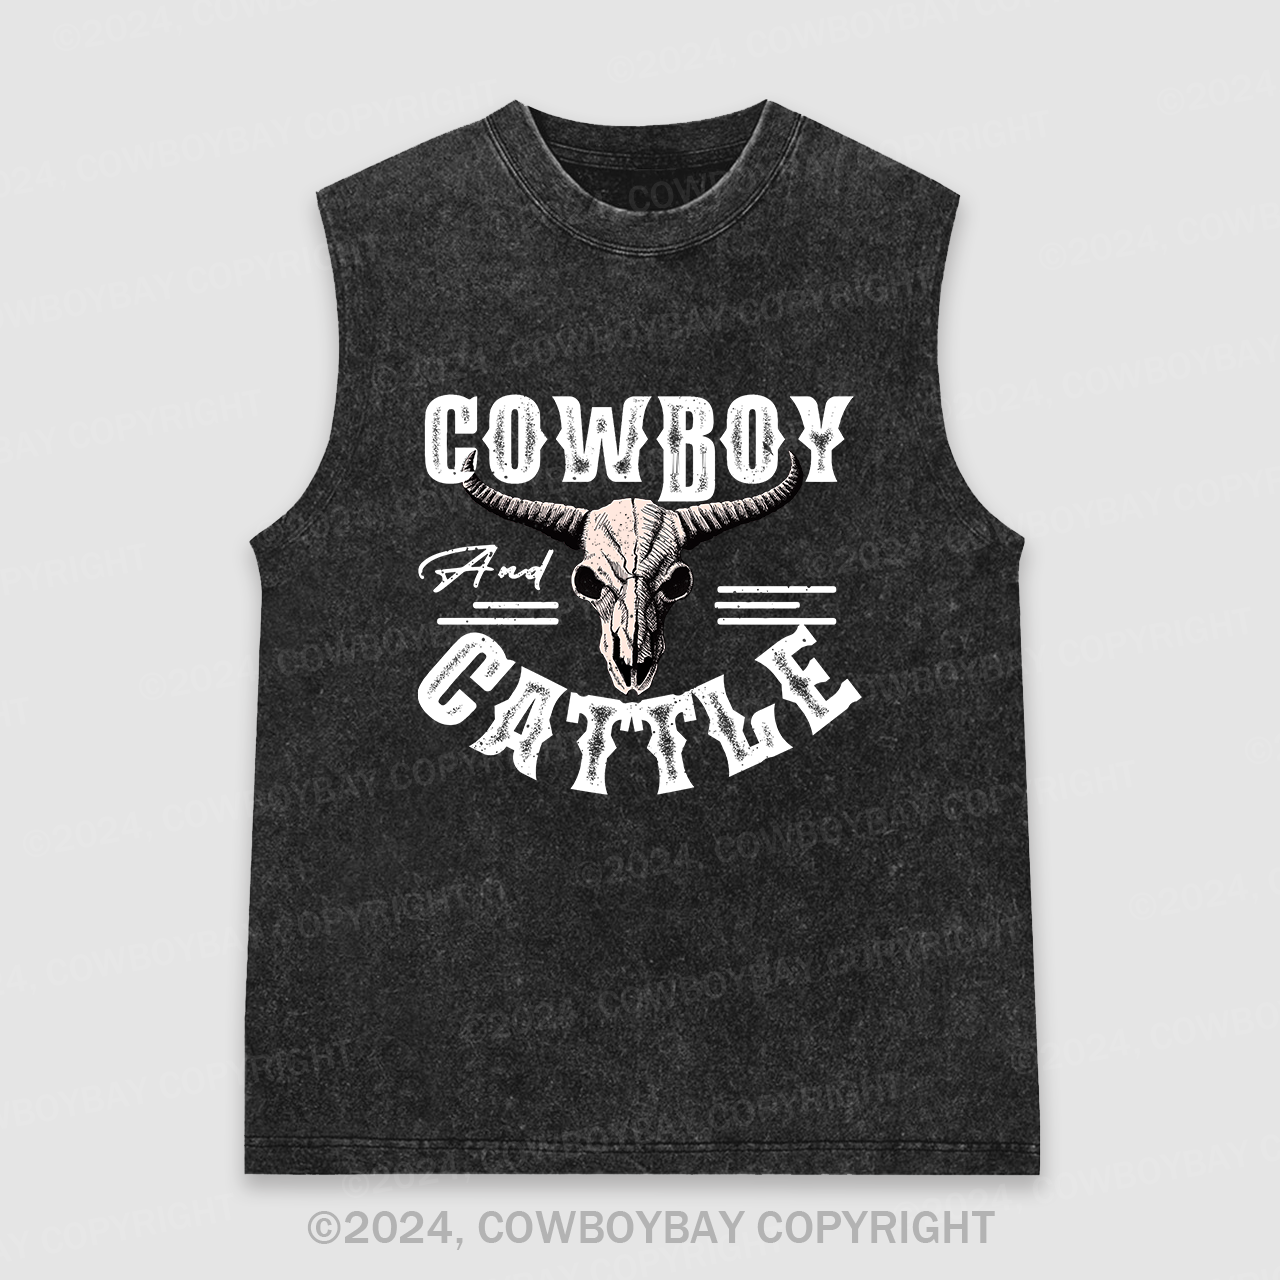 Cowboy and Cattle Washed Tanks